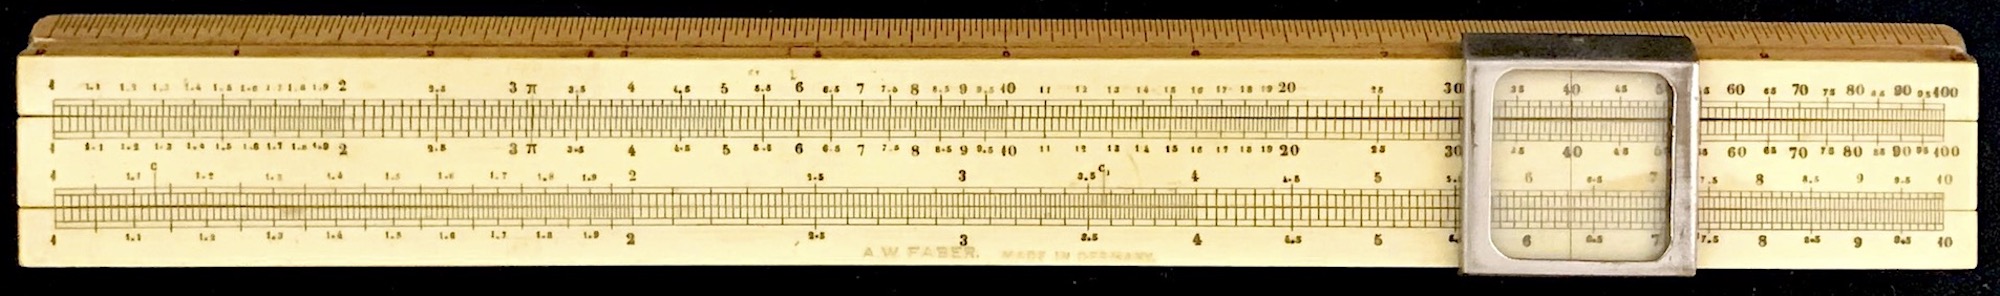 A Mannheim slide rule from the late 1890s.